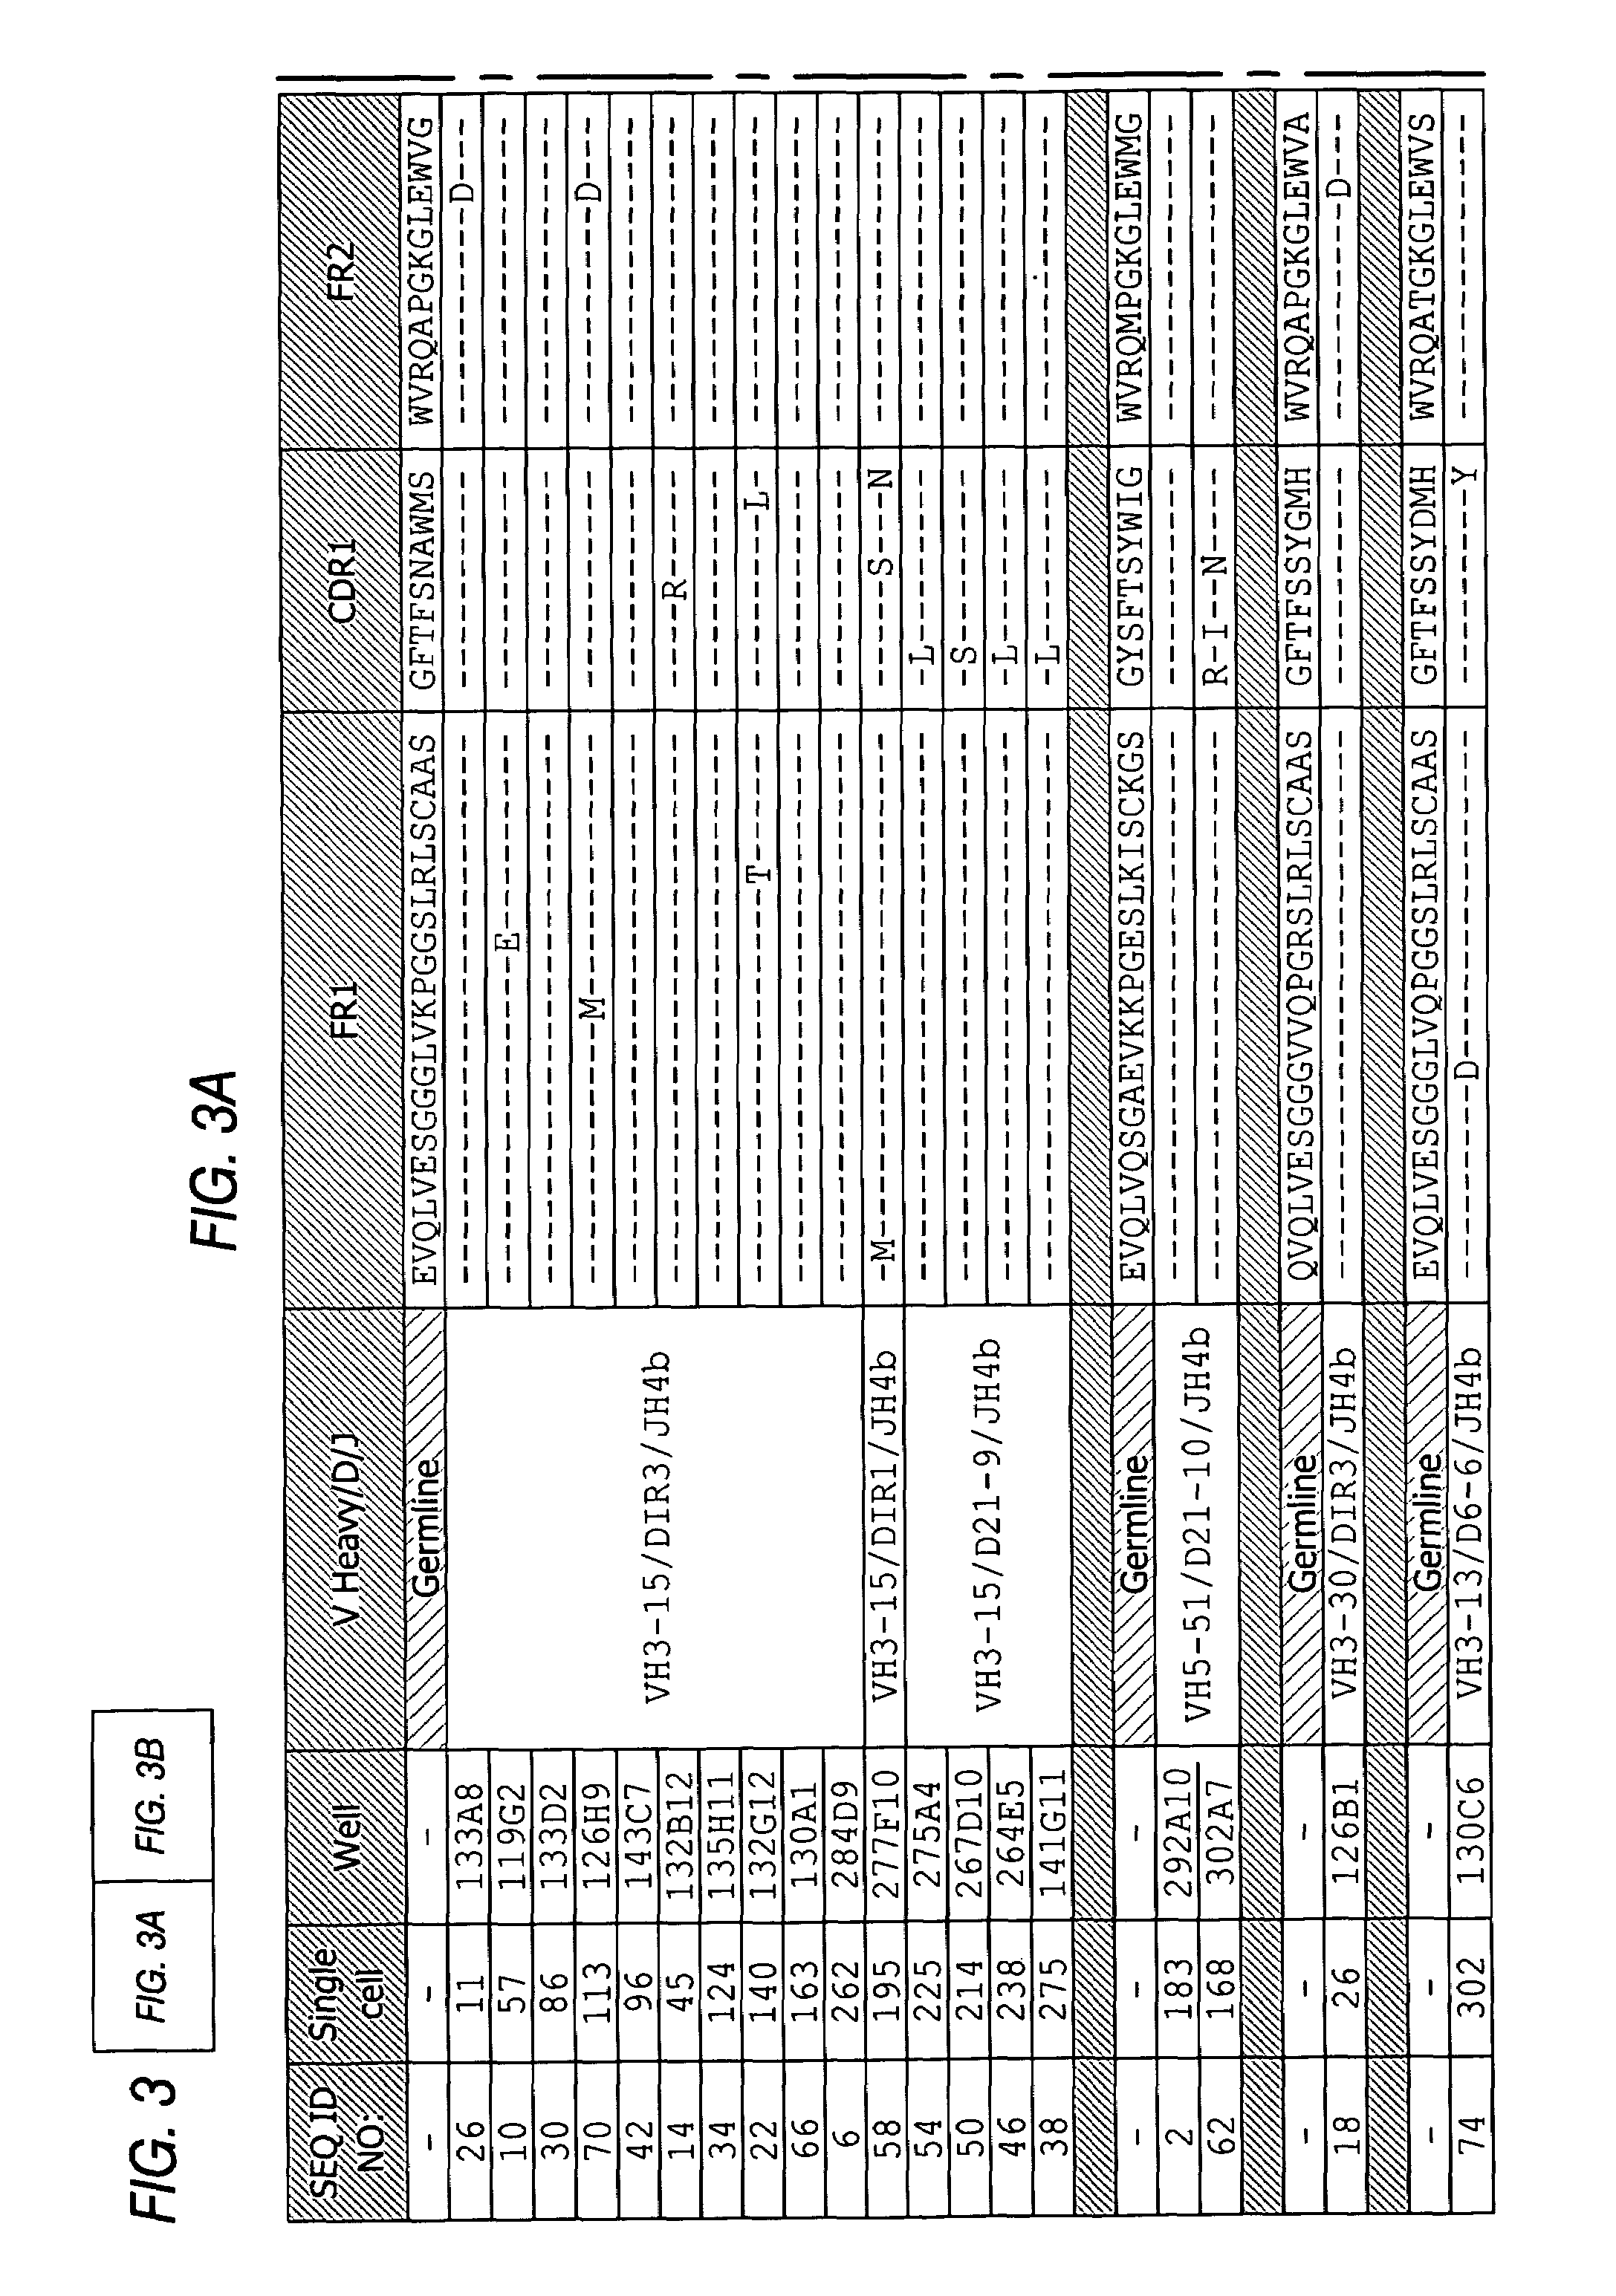 Antibodies directed to parathyroid hormone (PTH) and uses thereof